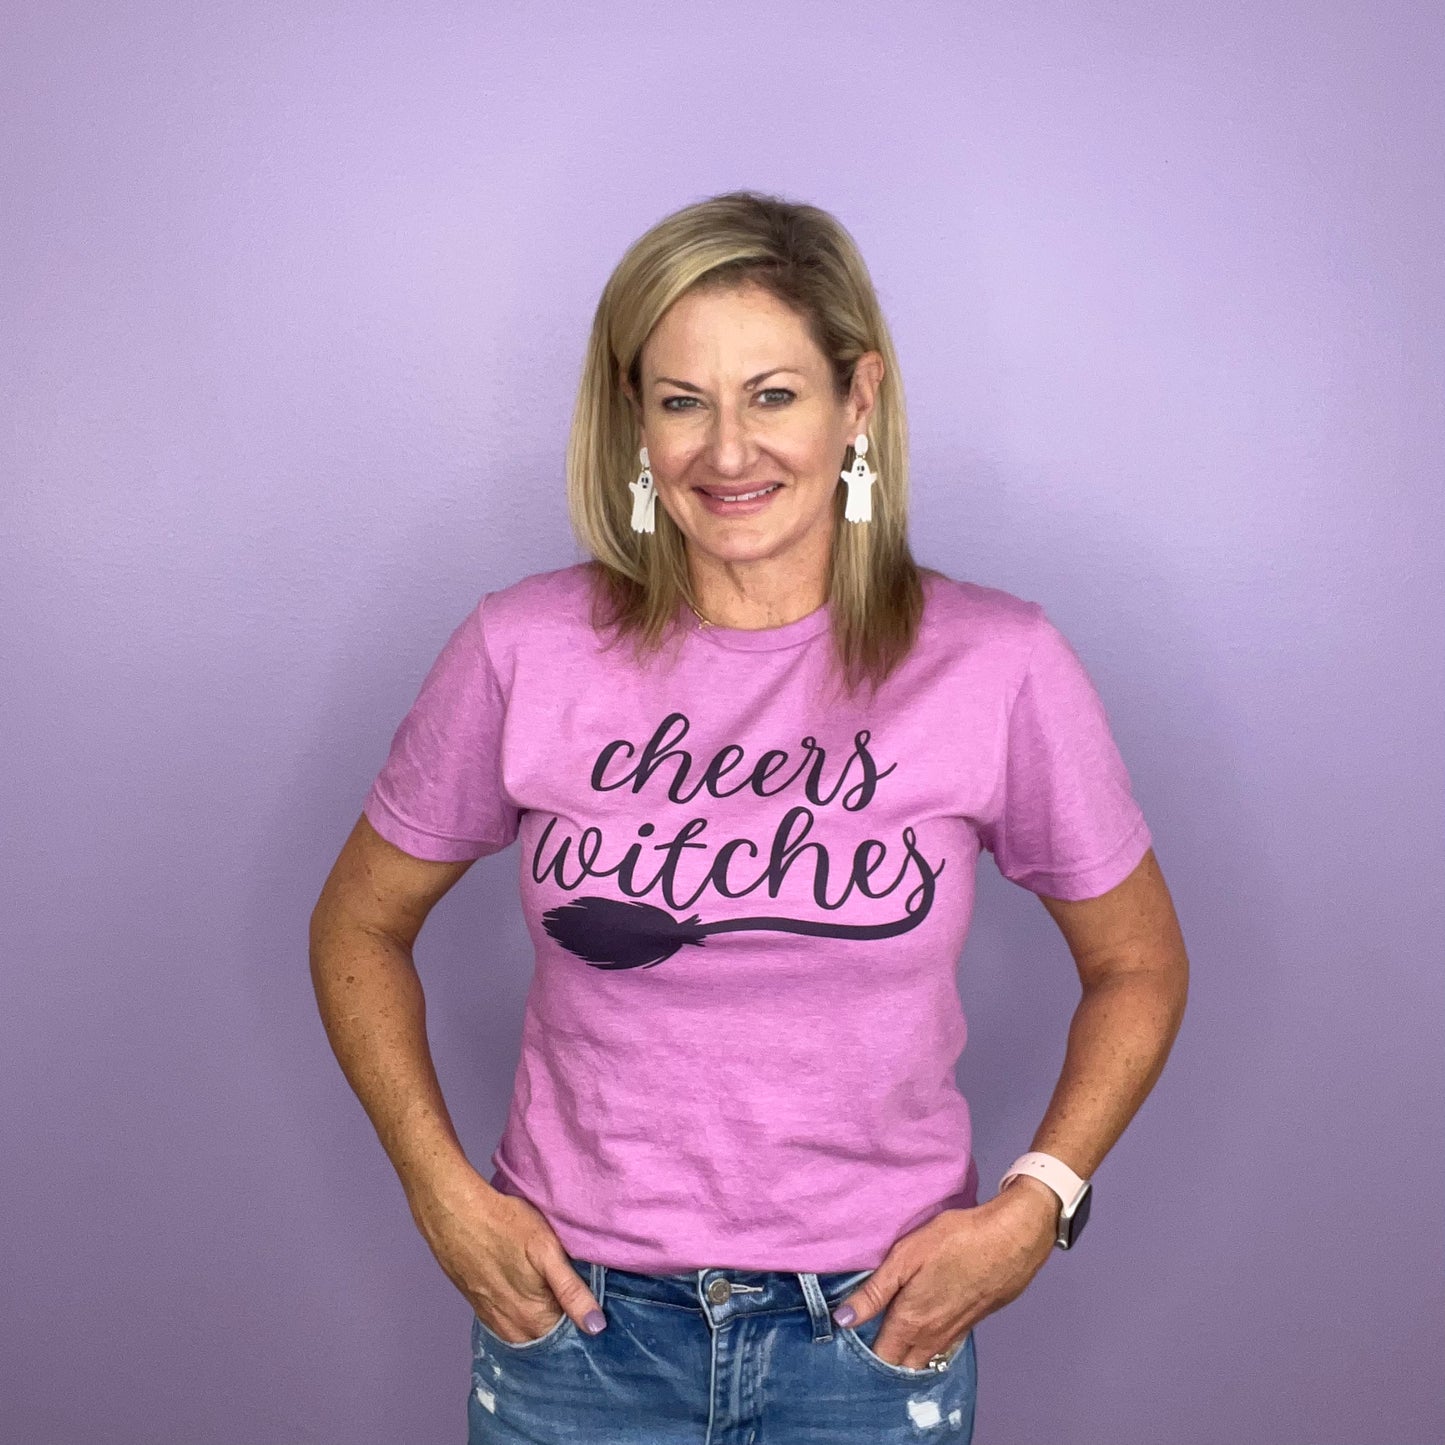 Cheers Witches Graphic T-Shirt